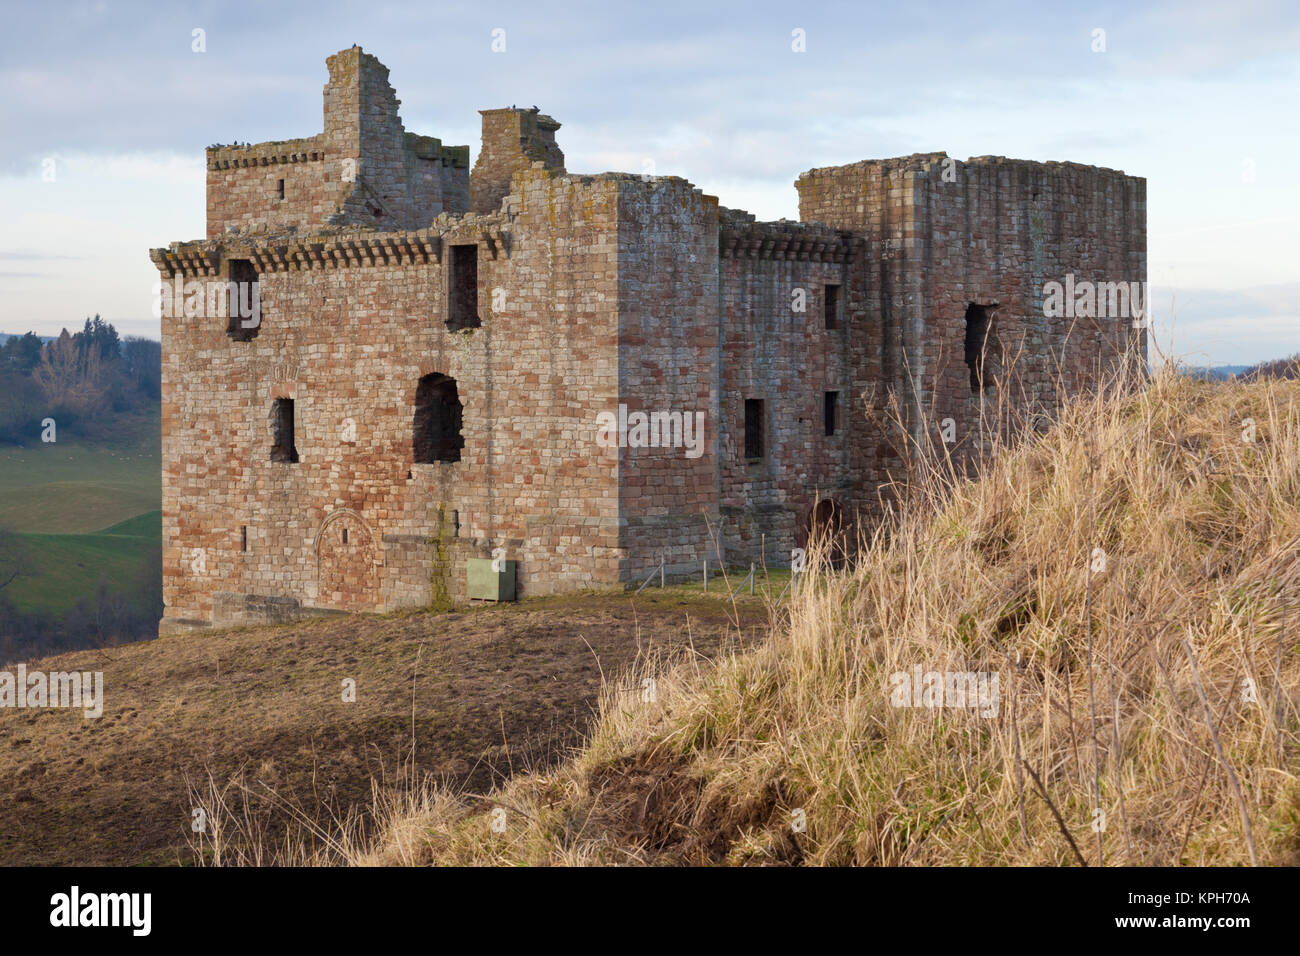 Dating from the 14th Century, Crichton is a ruined castle associated with many of the notable figures in the 15th and 16th C history of Scotland. Stock Photo